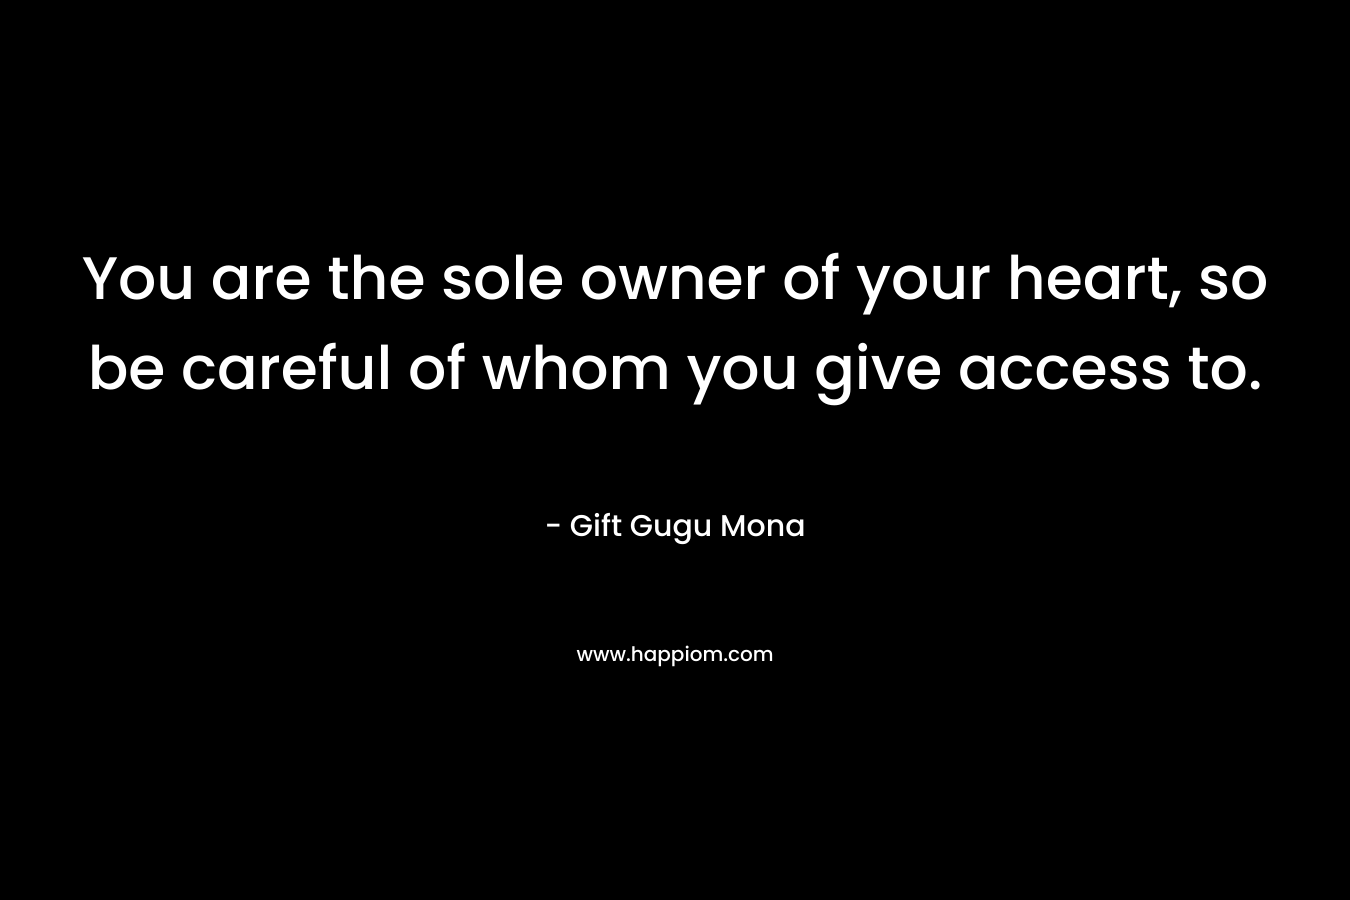 You are the sole owner of your heart, so be careful of whom you give access to.